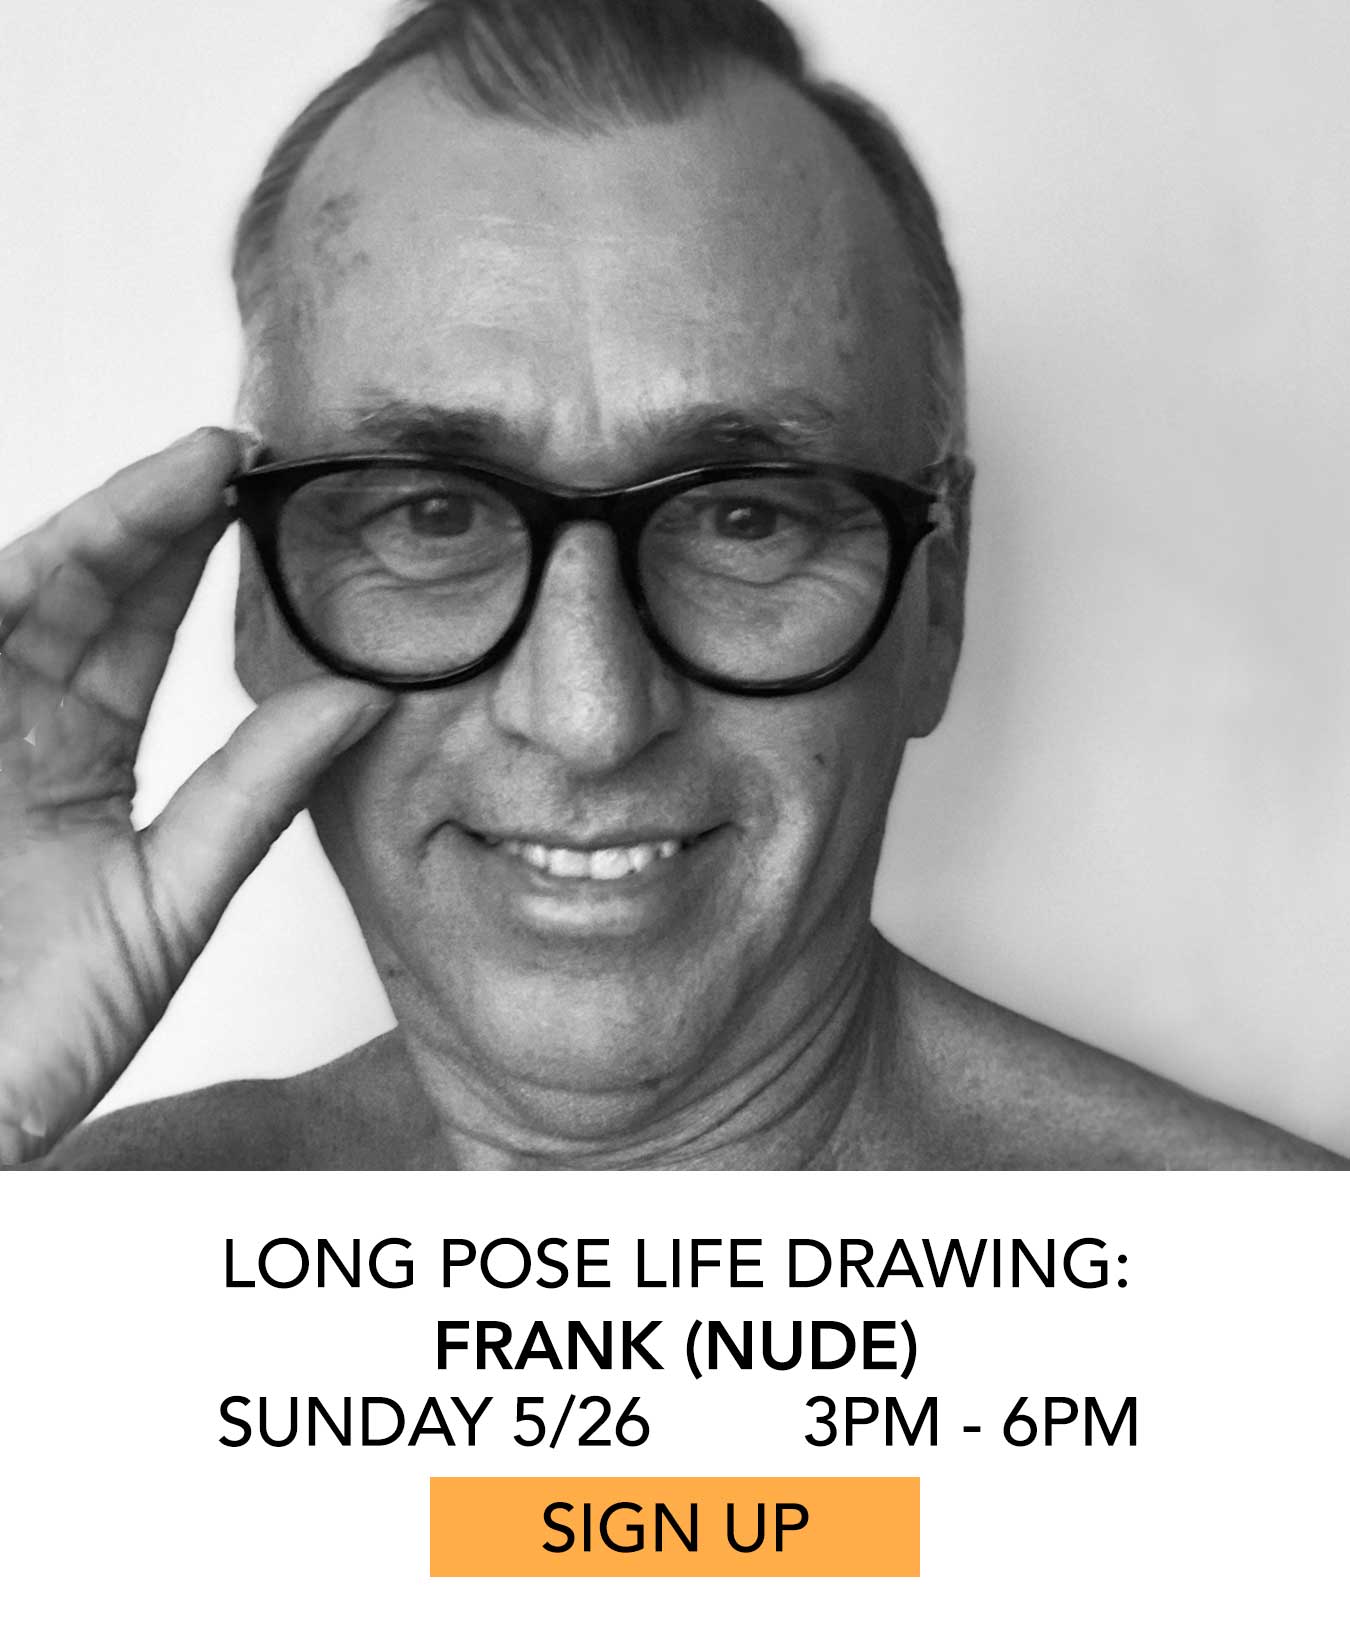 Life Drawing: Frank (nude). Sunday 5/26 from 3pm to 6pm. Click to Sign Up.